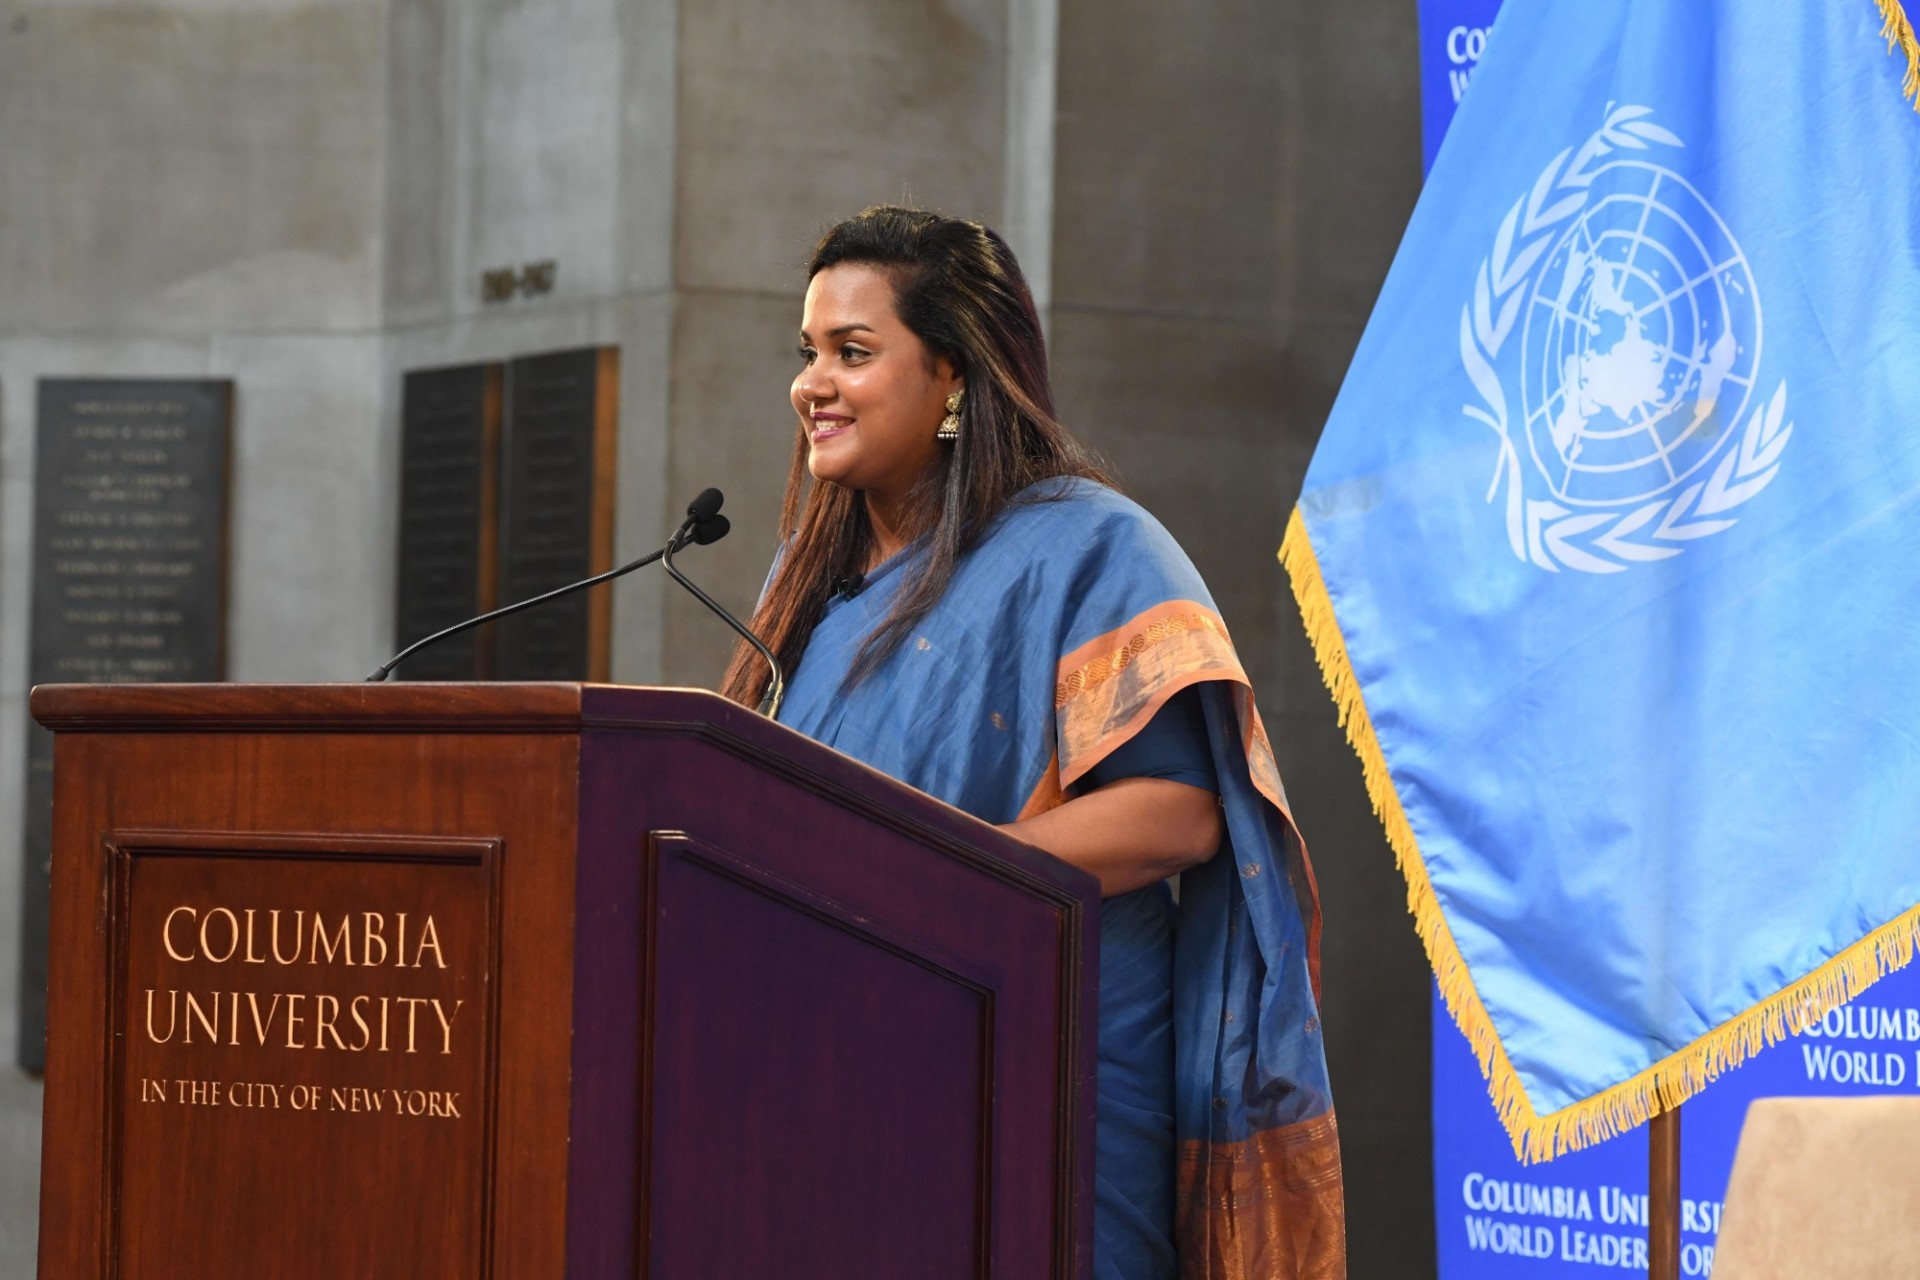 Jayathma Wickramanayake, UN Secretary-General's Envoy on Youth delivers her address to Columbia University students, faculty and staff.